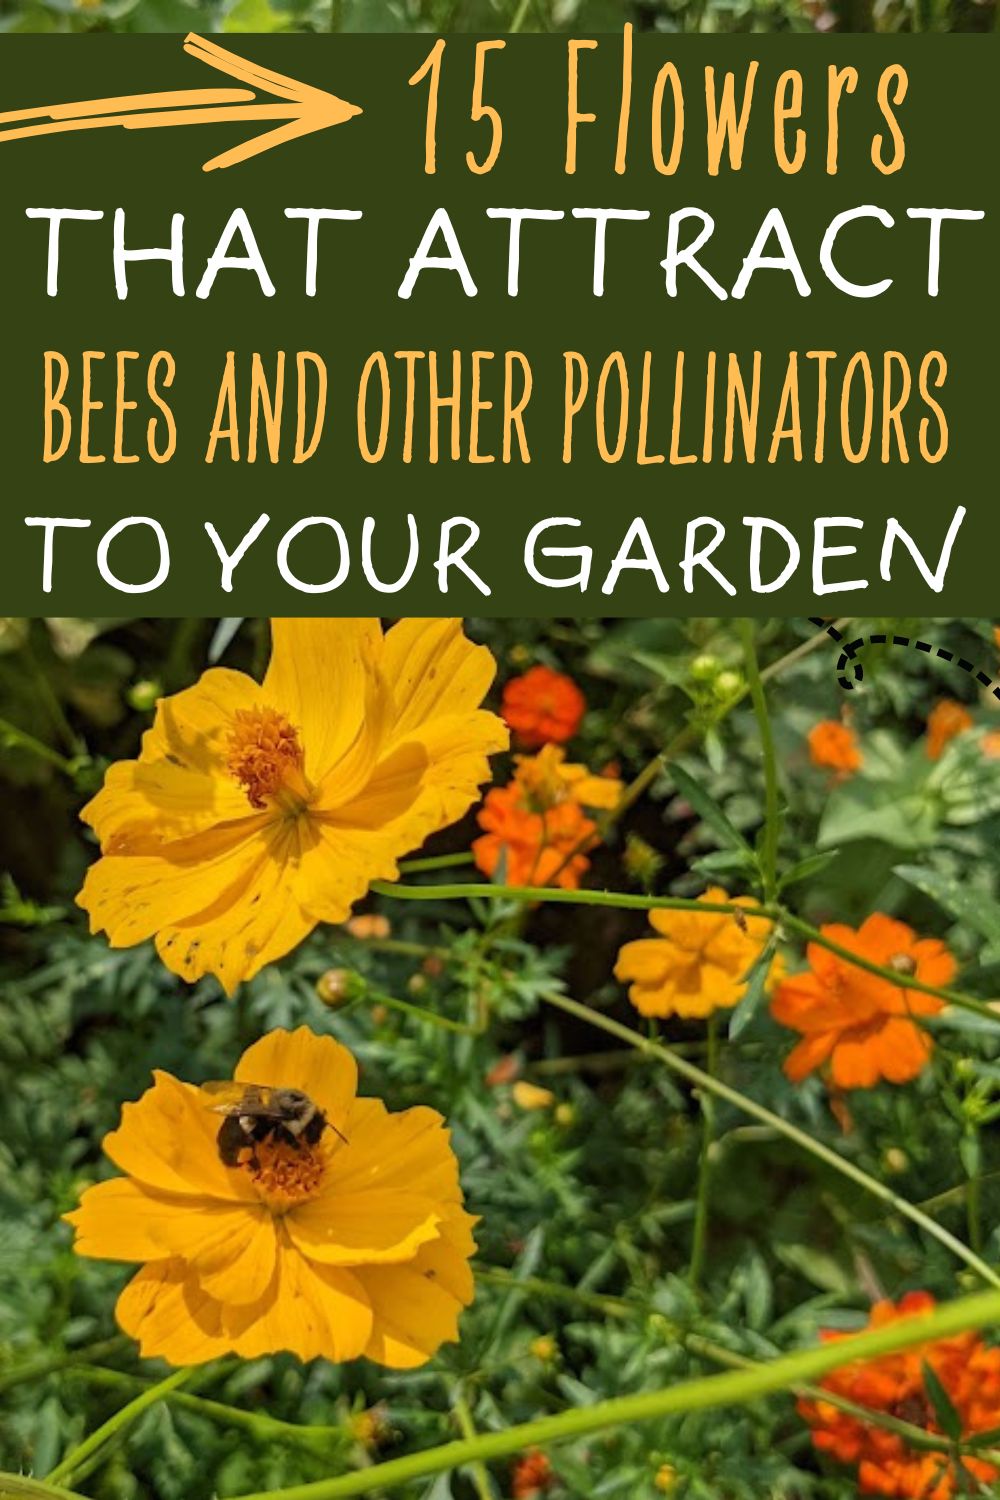 15 flowers that attract bees and other pollinators to your garden.